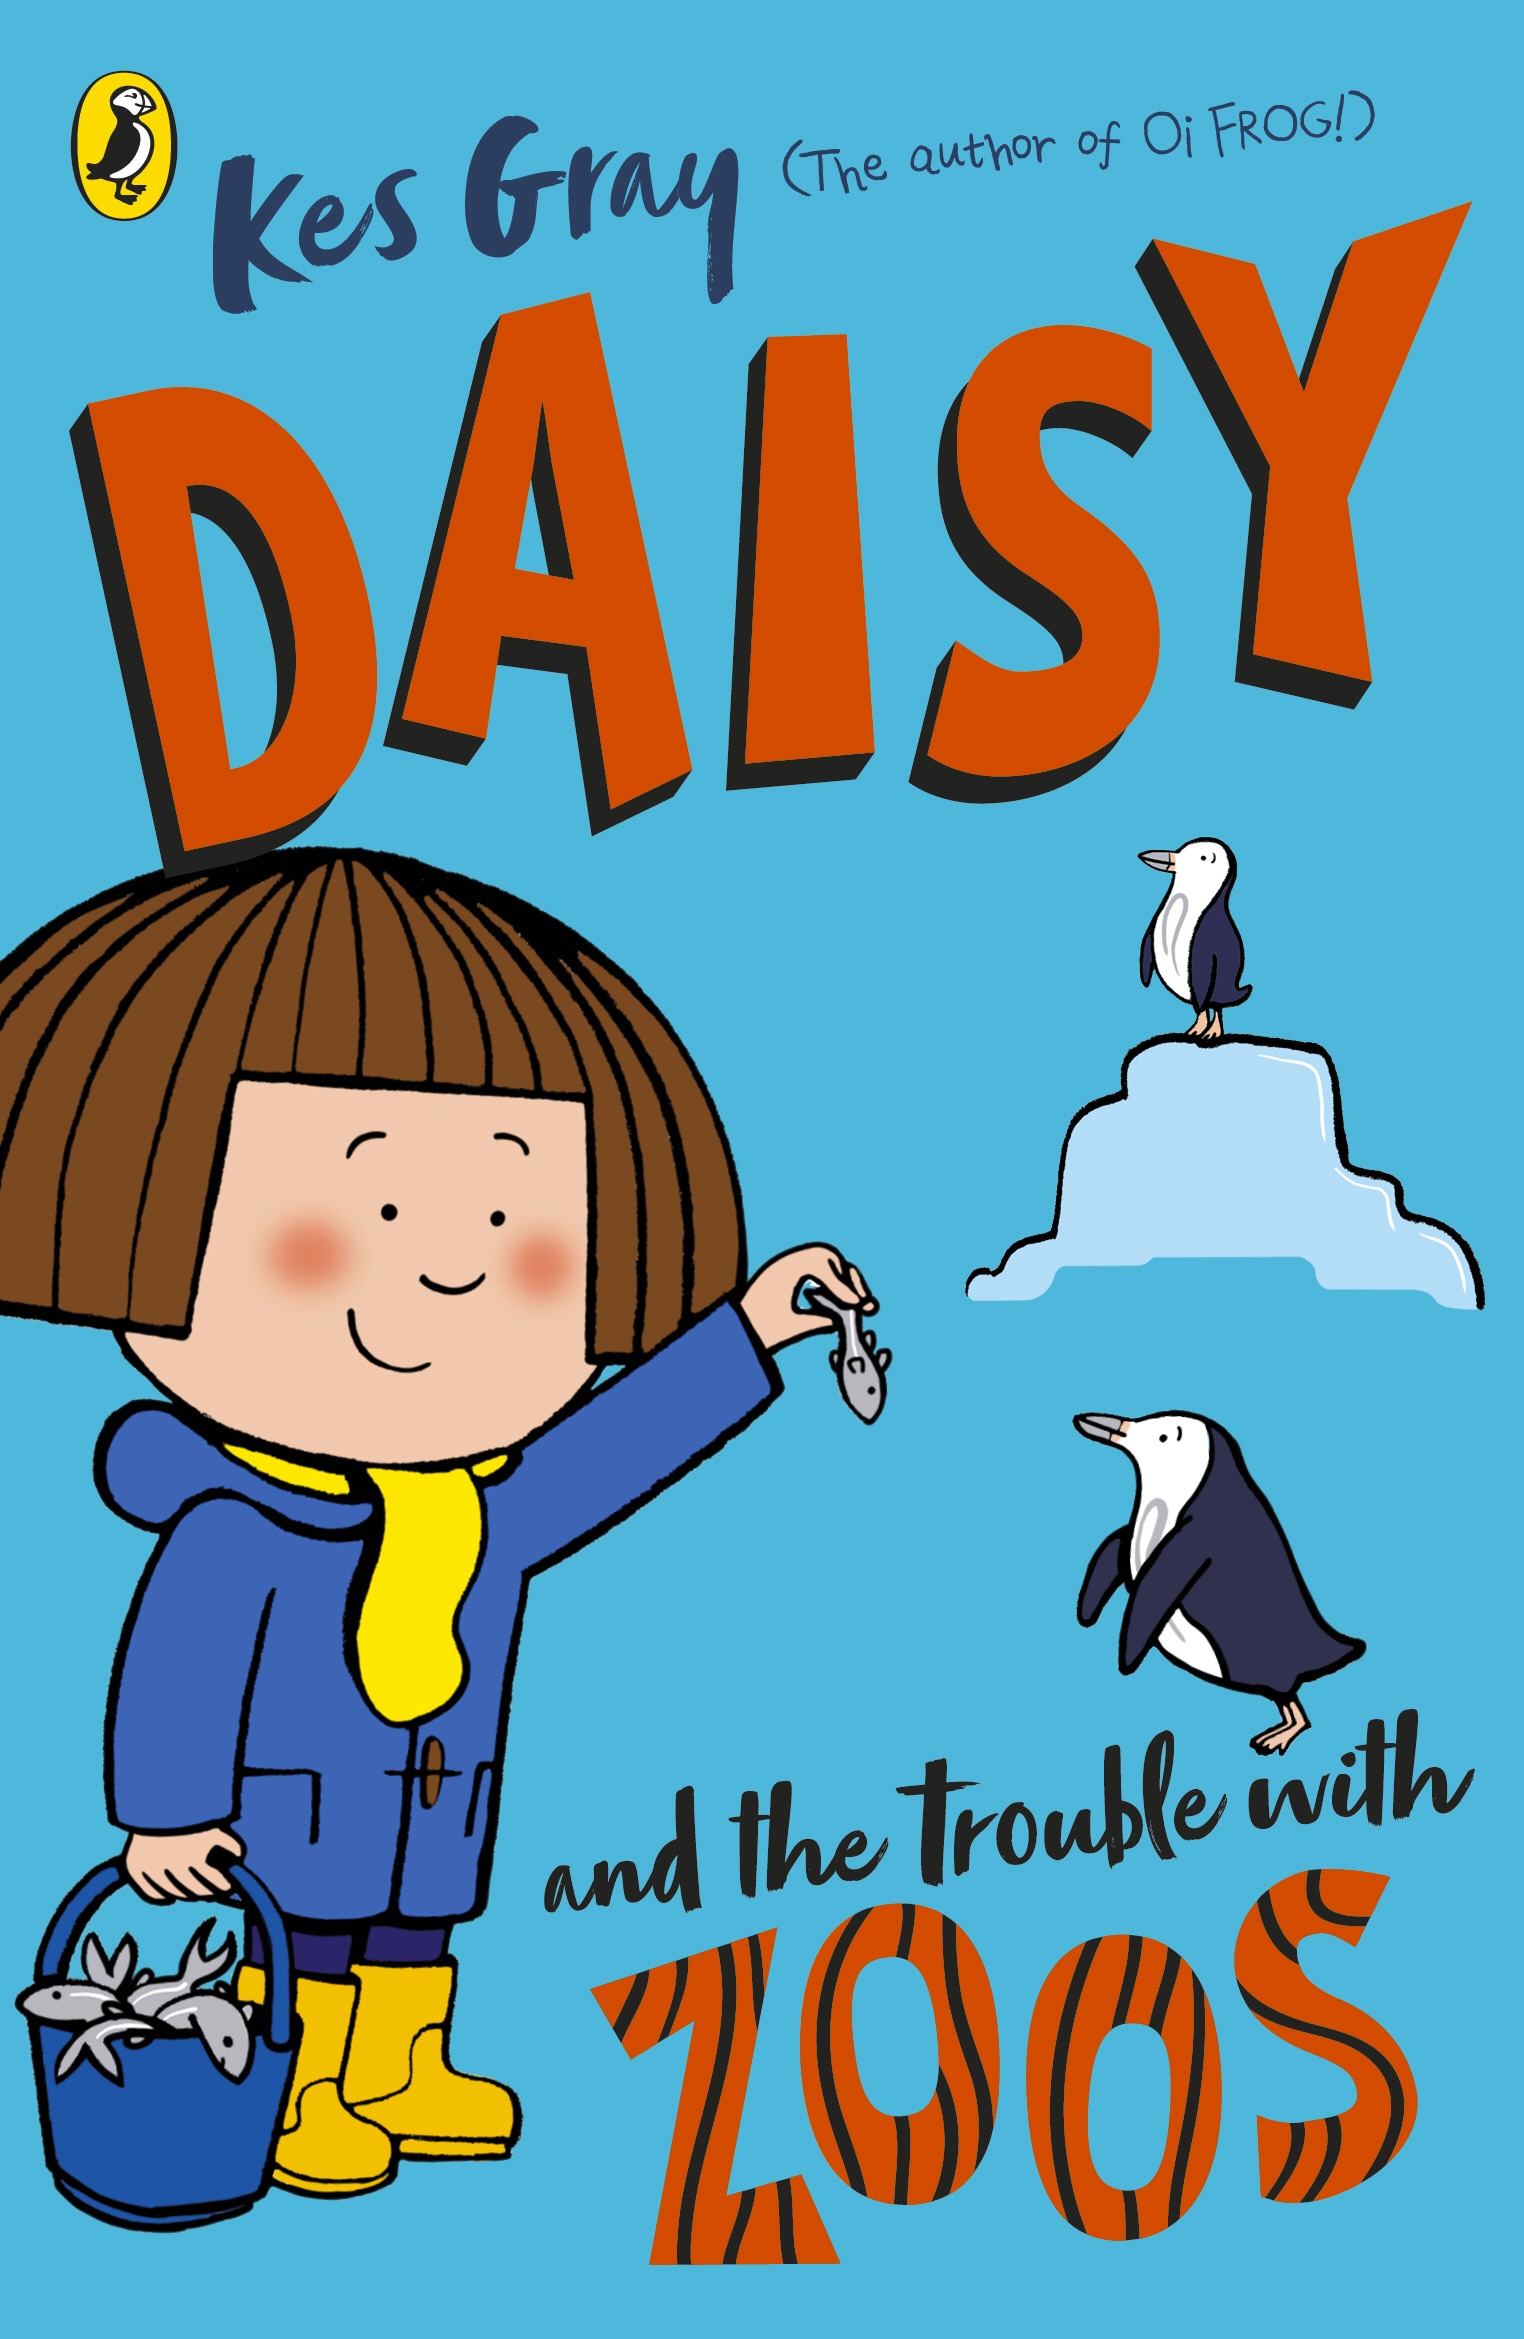 Book “Daisy and the Trouble with Zoos” by Kes Gray — March 5, 2020